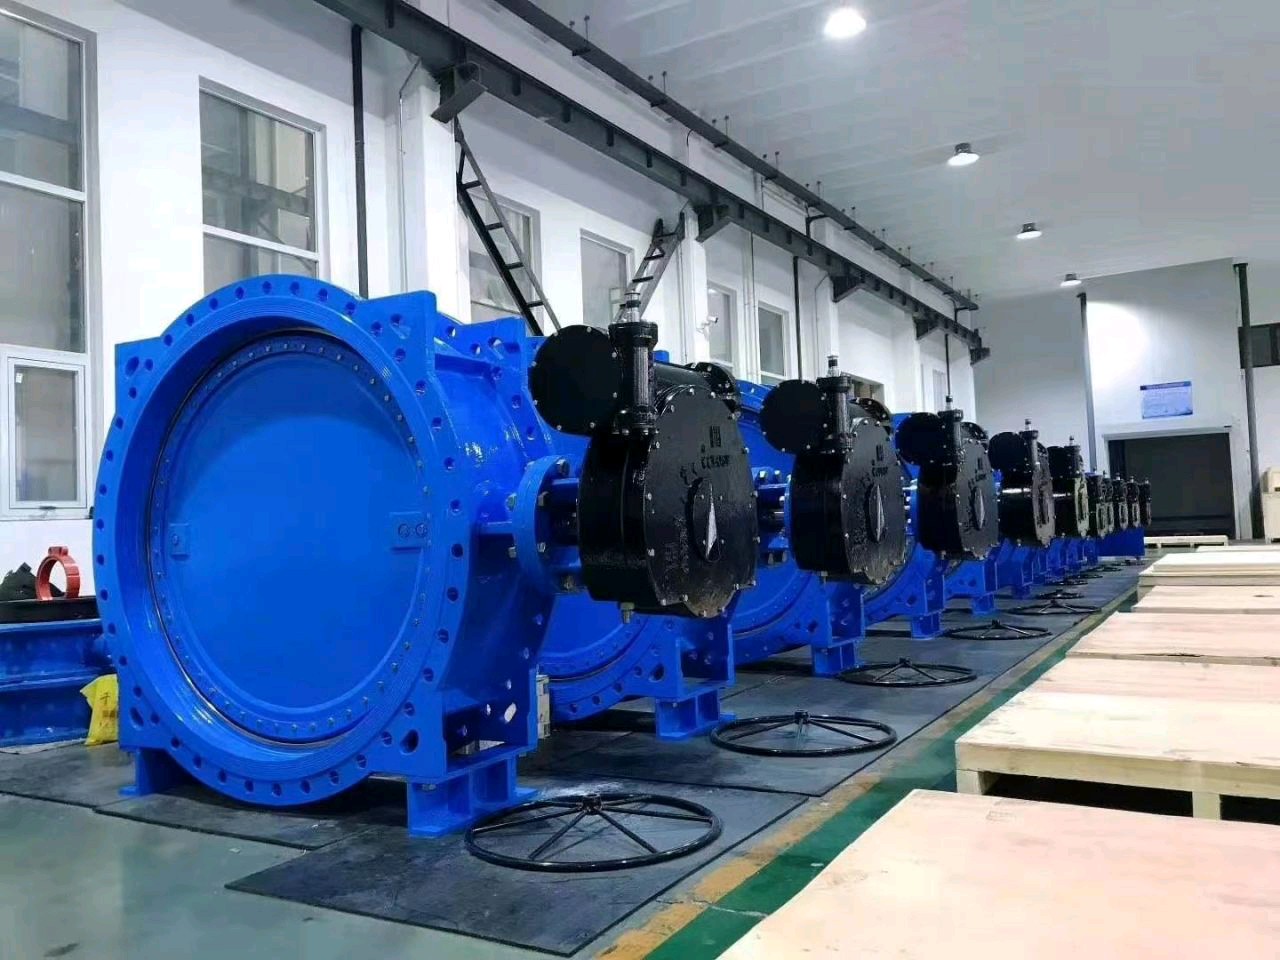 Delivery of DN1600-DN1800 double eccentric butterfly valves for European projectmers